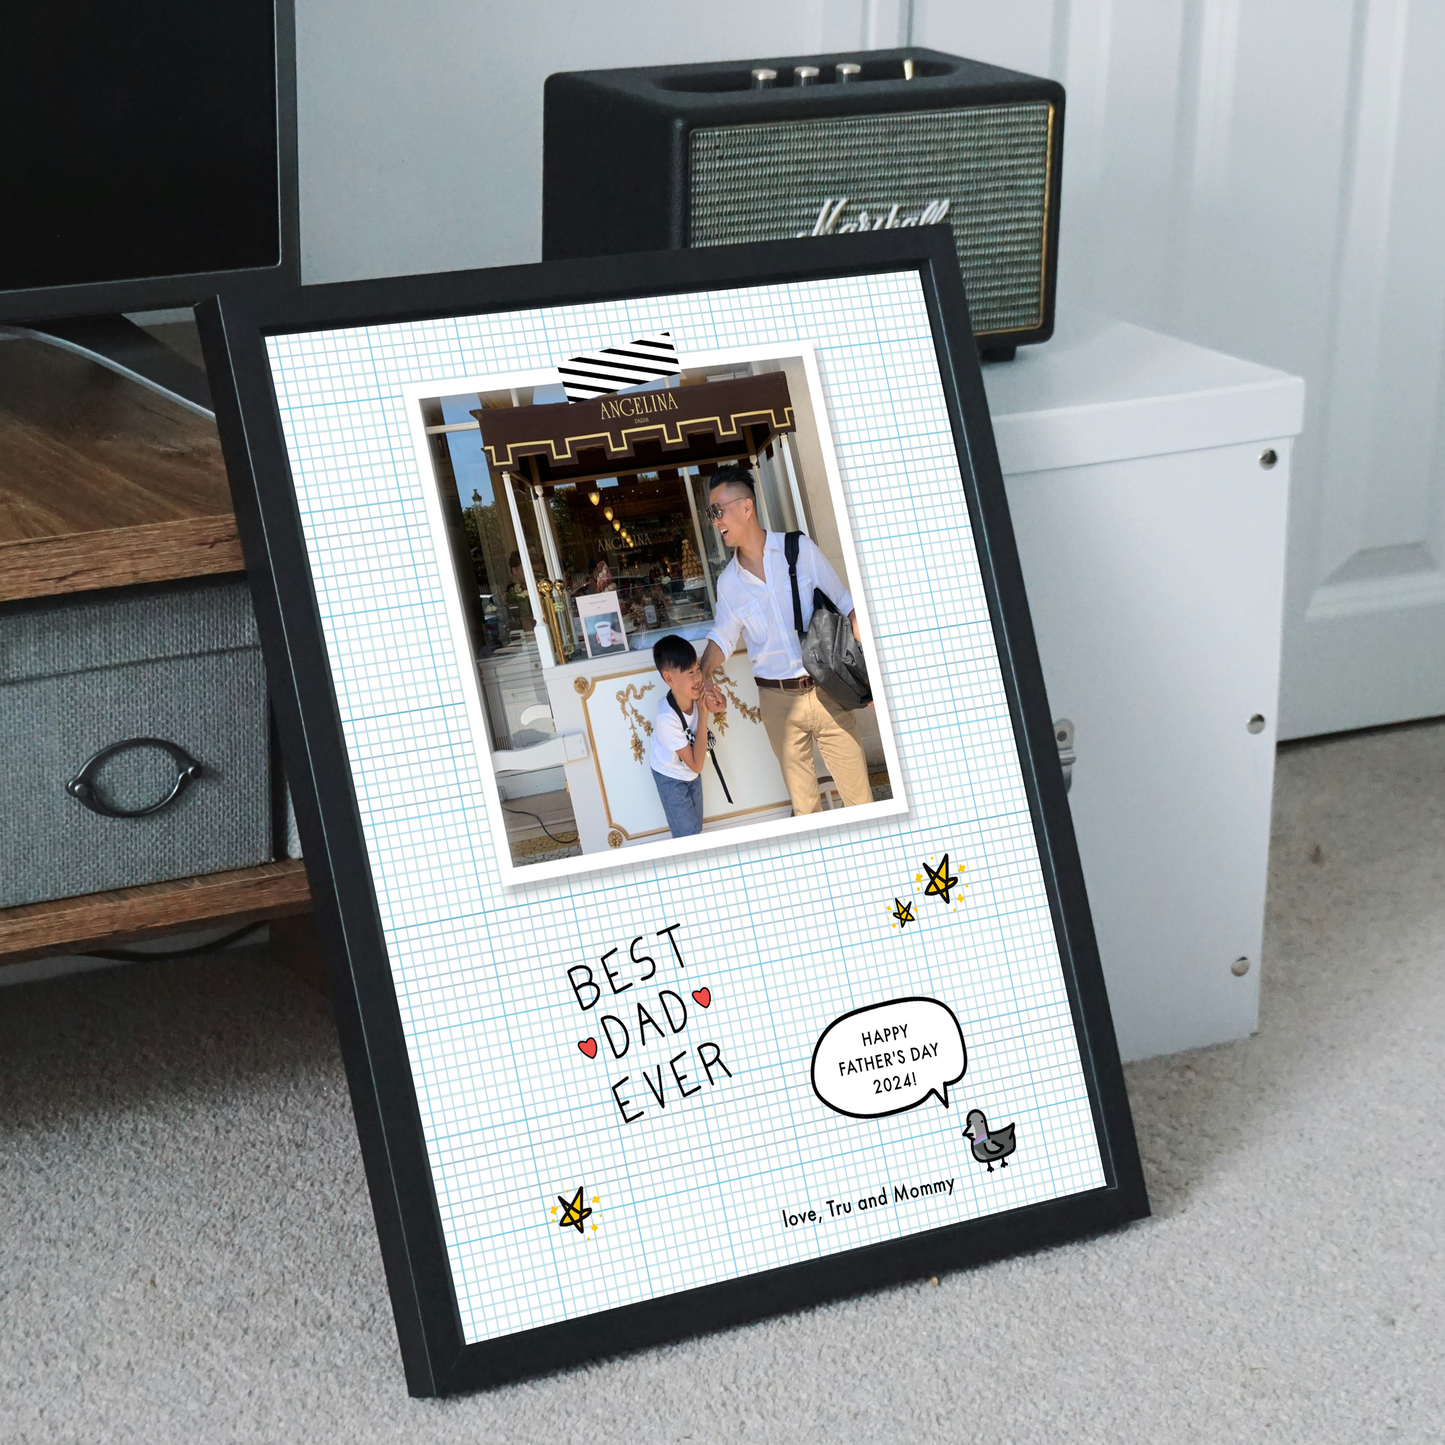 Personalized Photo Print - old school